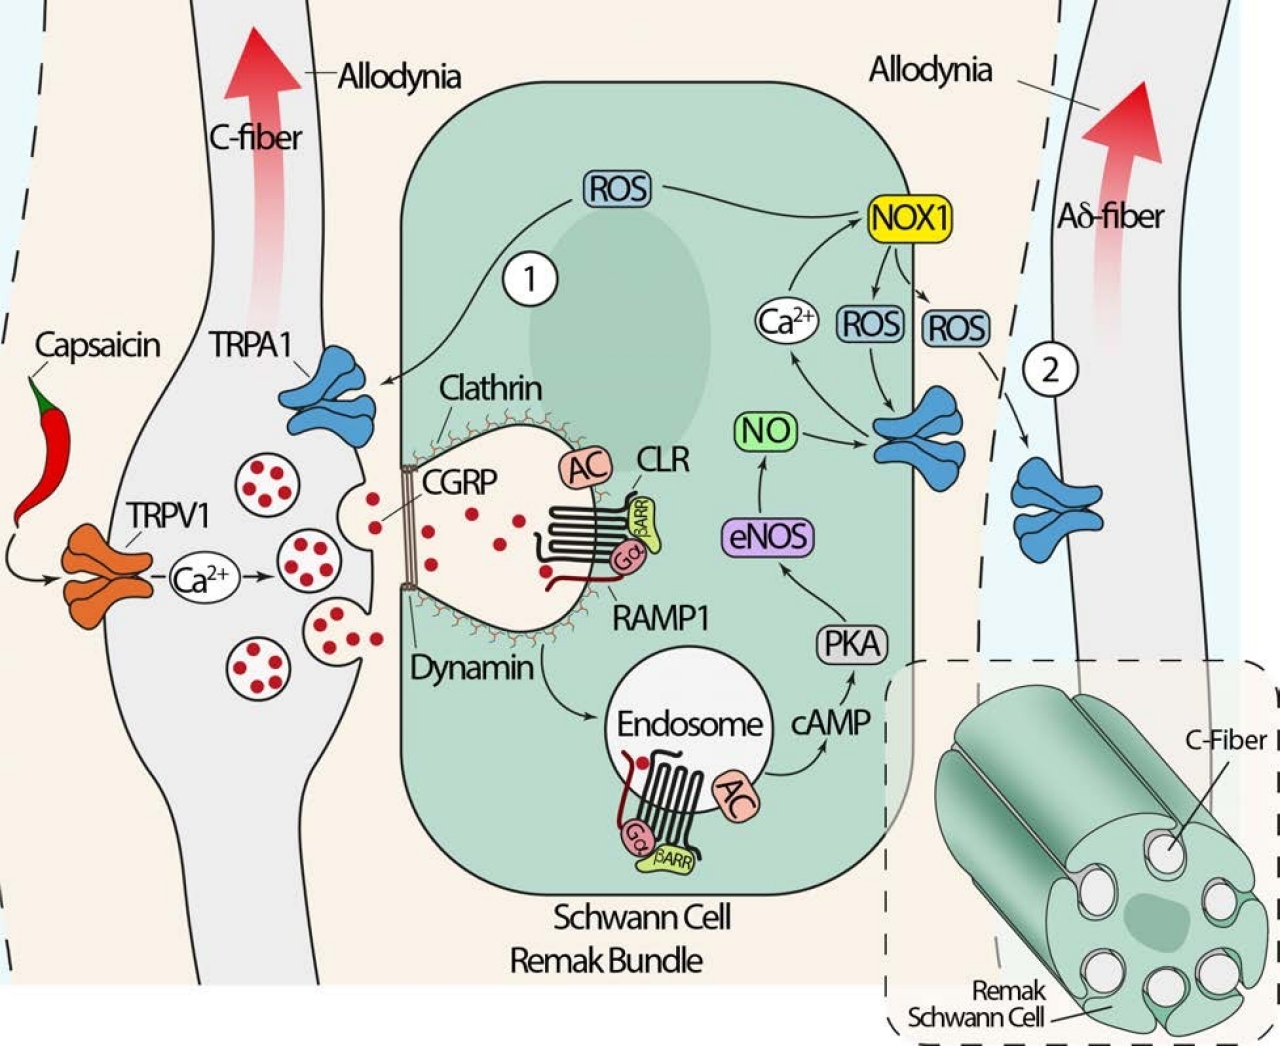 An illustration of the pain signaling pathway elicited by CGRP